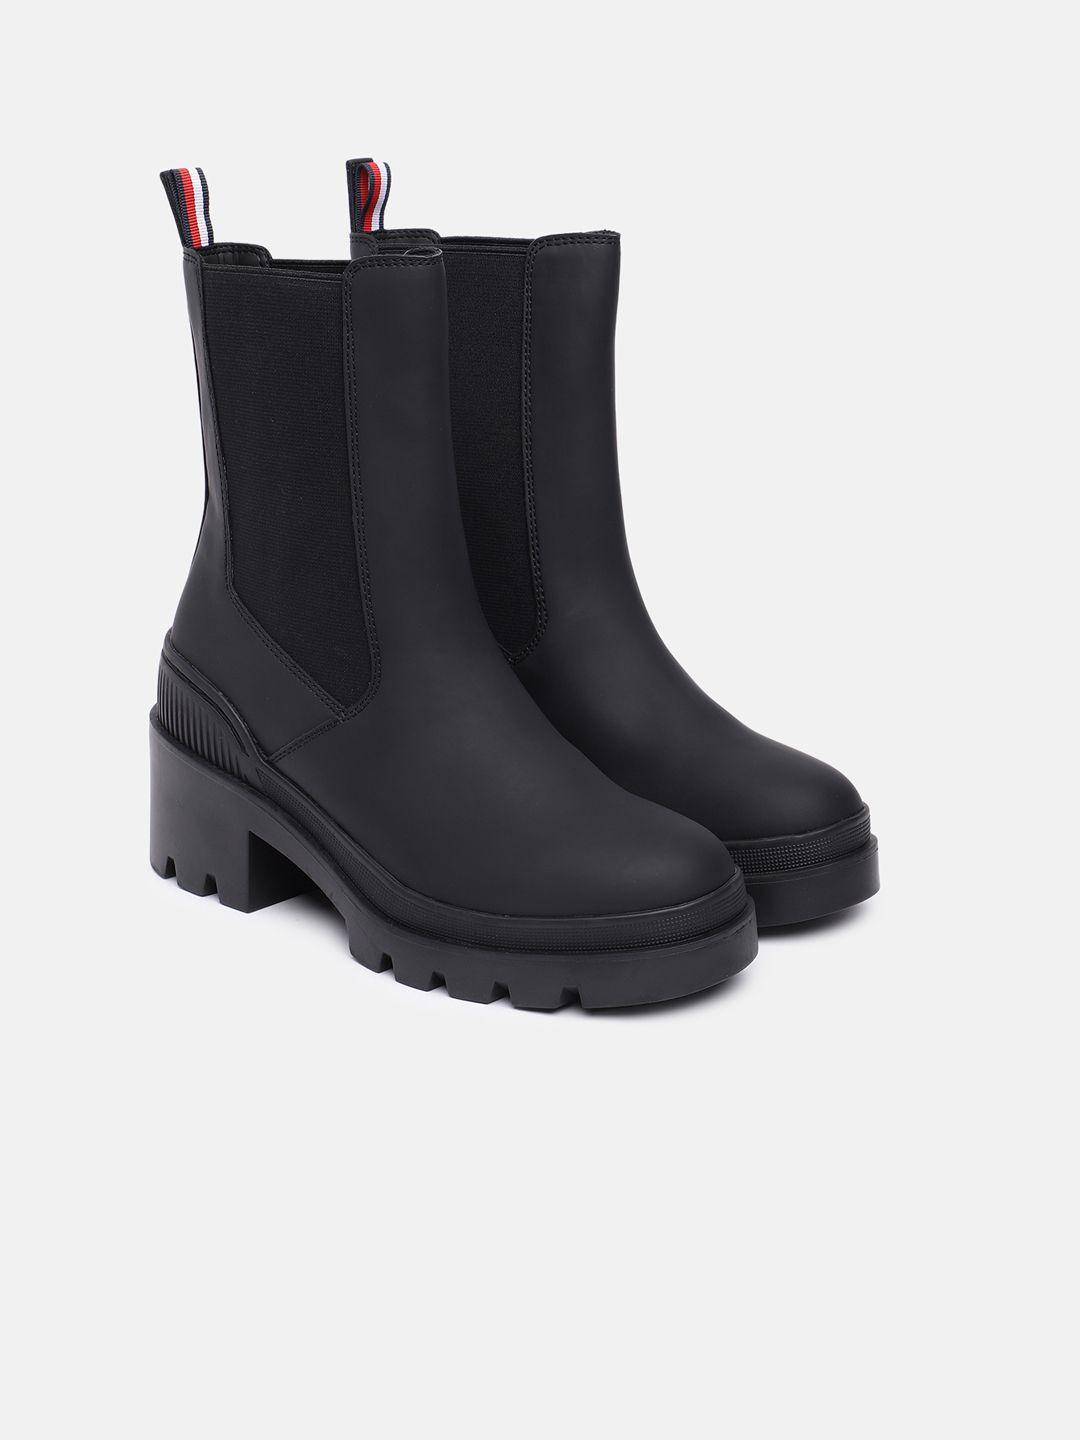 tommy-hilfiger-women-solid-rubberized-mid-heel-high-top-chunky-boots